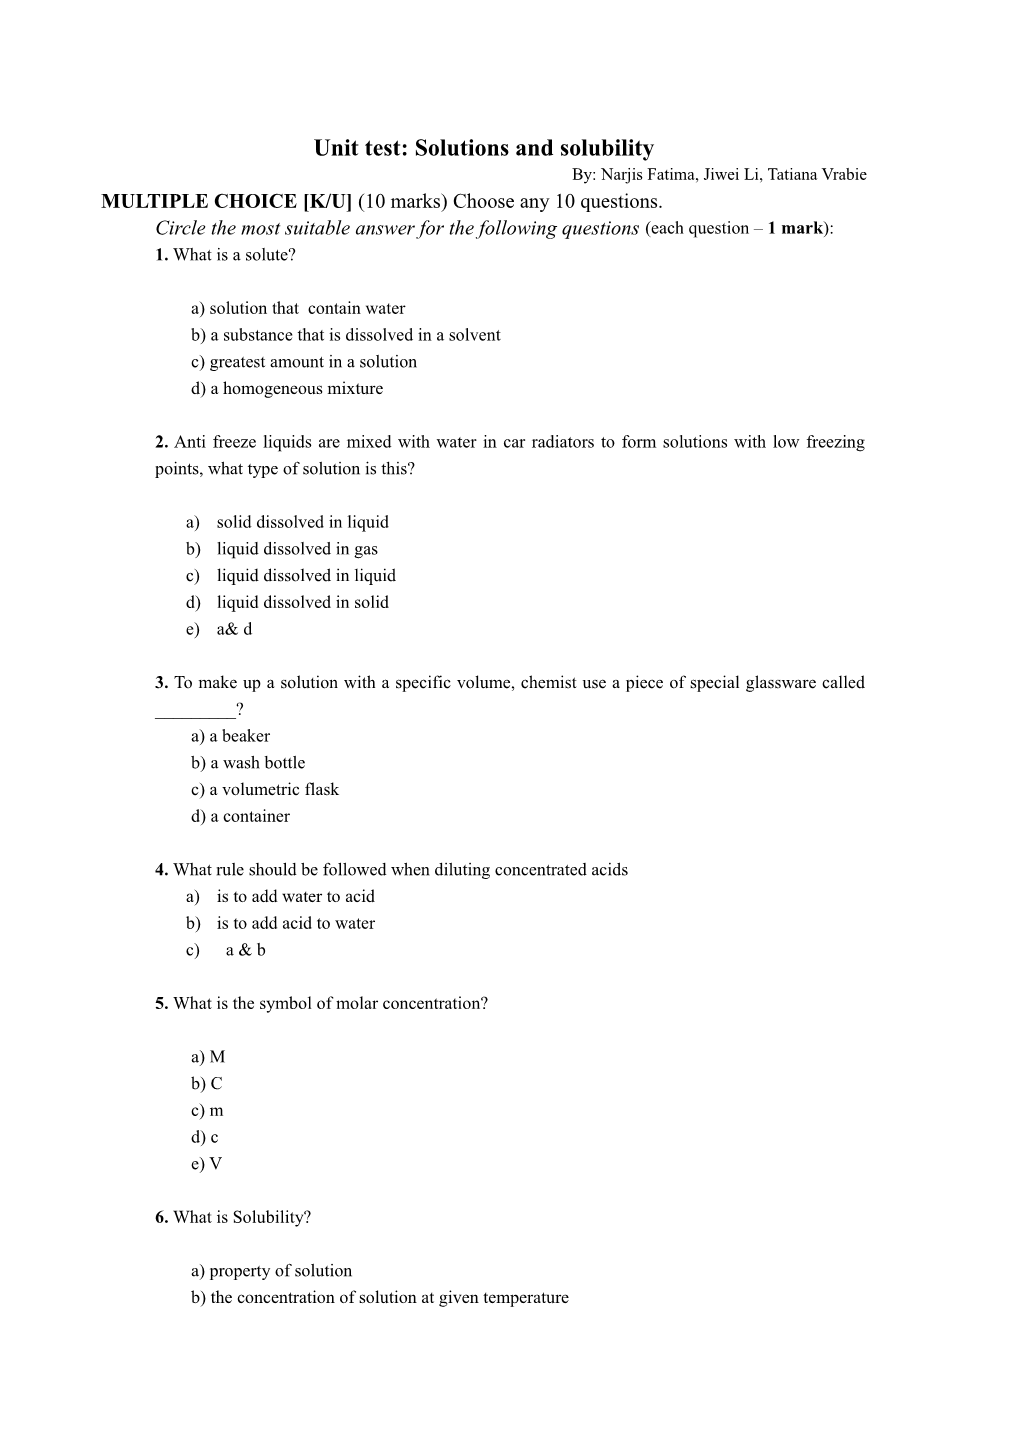 Unit Test: Solutions and Solubility